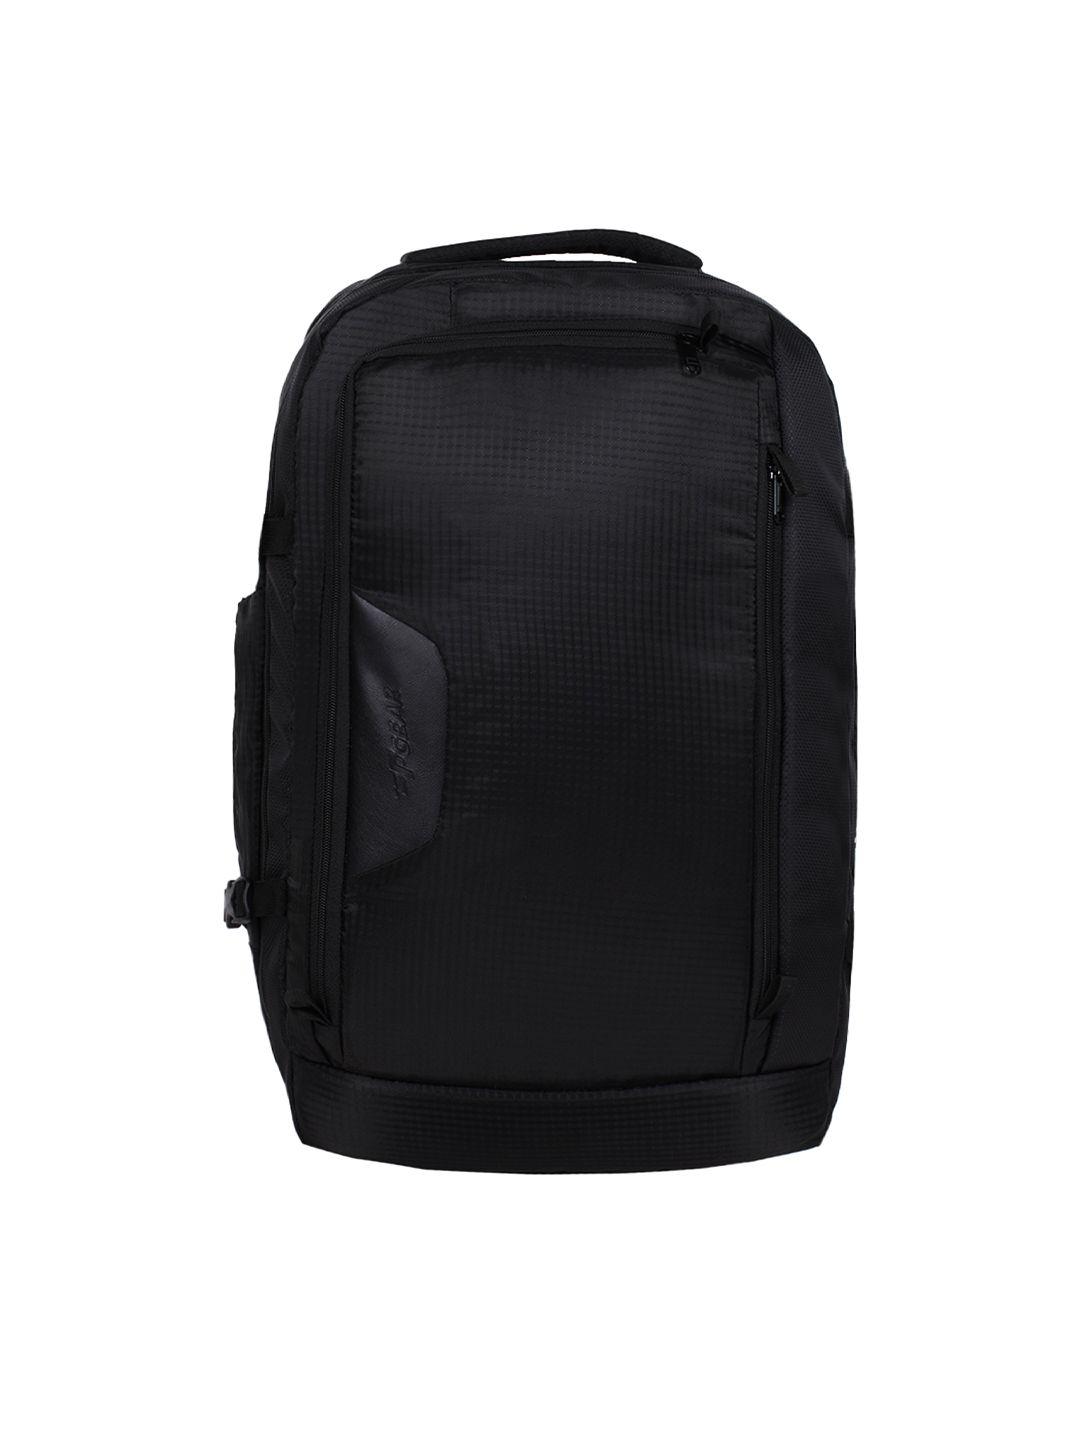 f-gear-unisex-black-solid-backpack